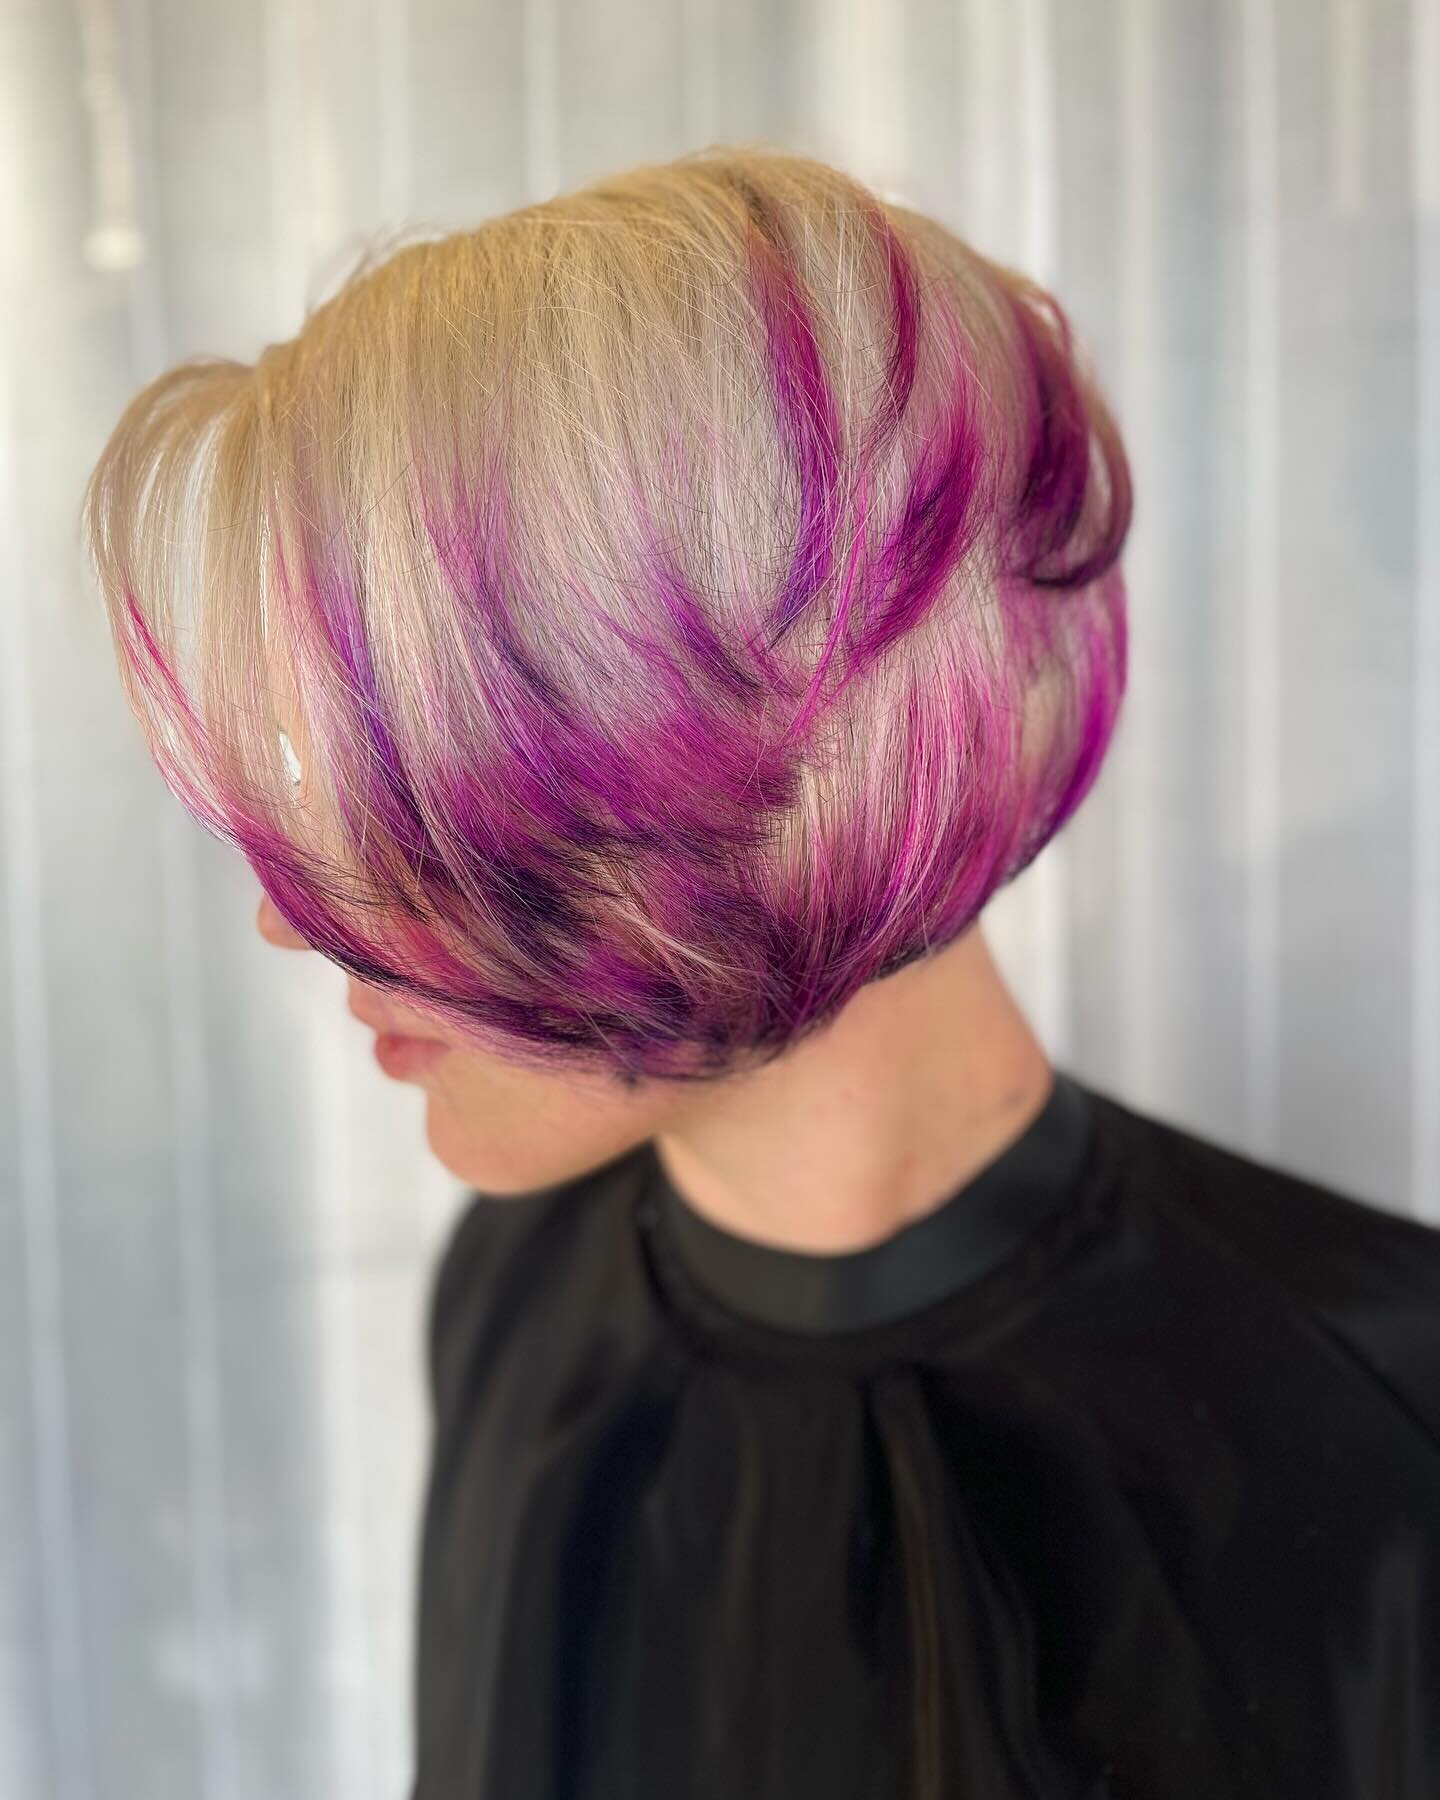 Punk Princess Vibes🩷🖤

Crafted colors from @artistrybymikks just do something to us🤩

-
-
-
Call 505-883-9707 to book an appointment today! 
#punk #punkprincess #blonde #blondehair #pinkandblack #inspire #inspiredaily #inspireothers #abq #abqhair 